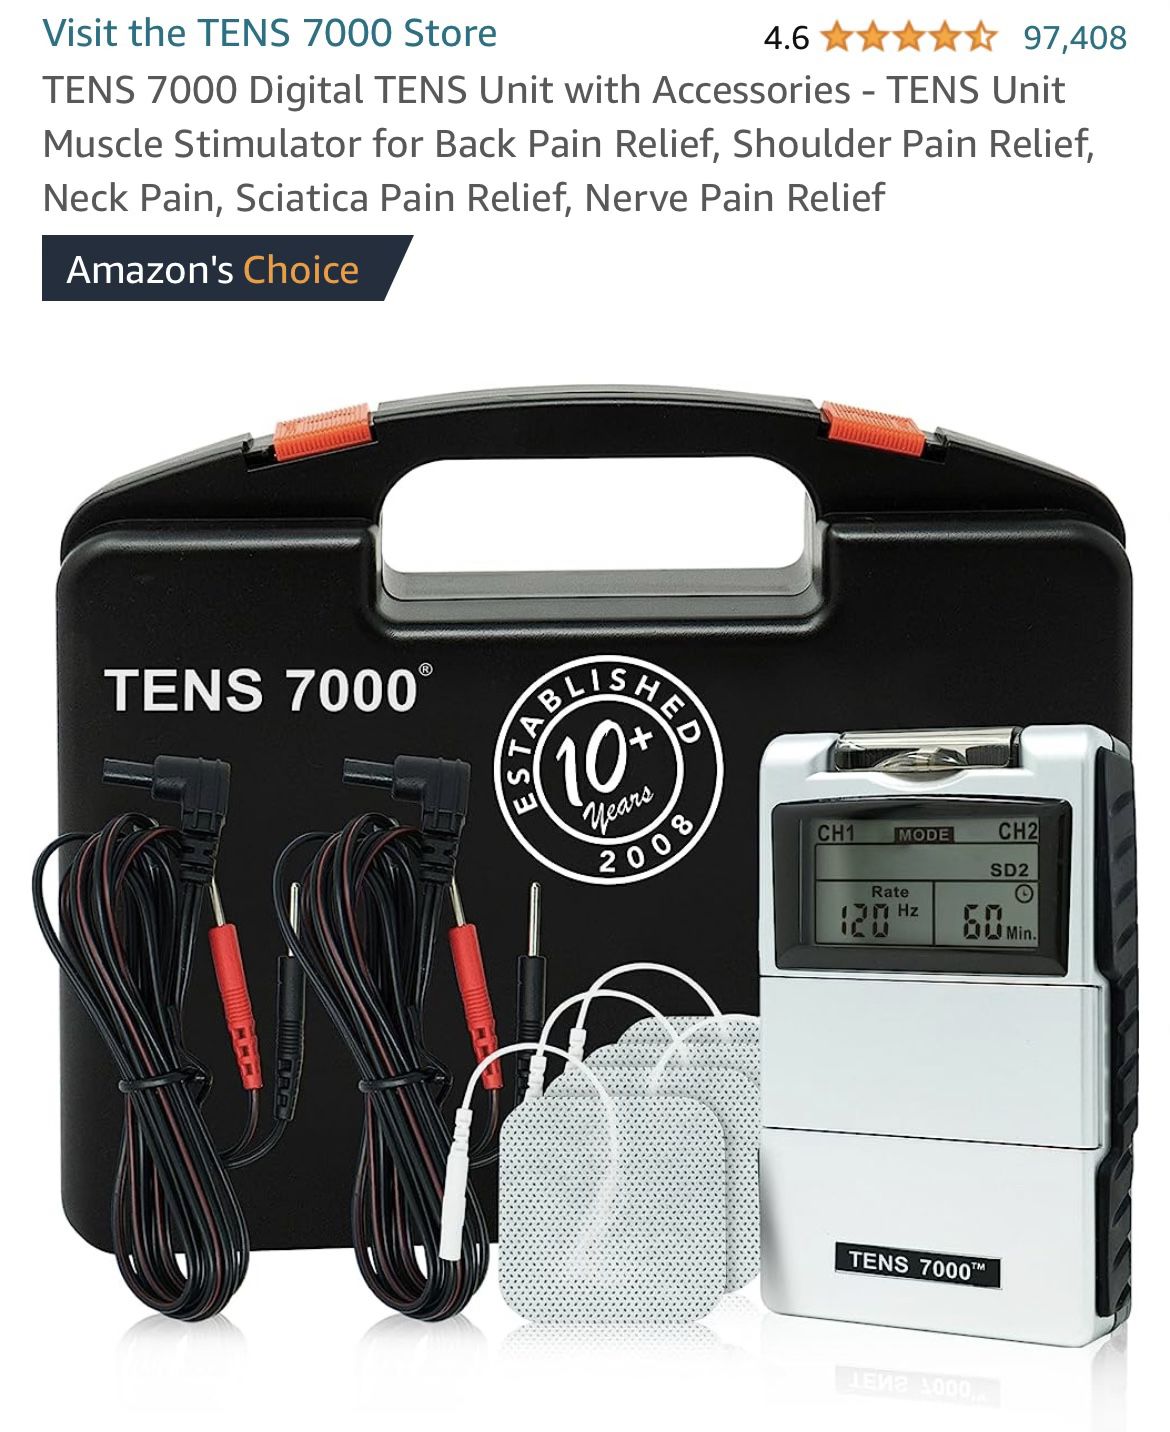 TENS 7000 Digital TENS Unit with Accessories - TENS Unit Muscle Stimulator for Back Pain Relief 